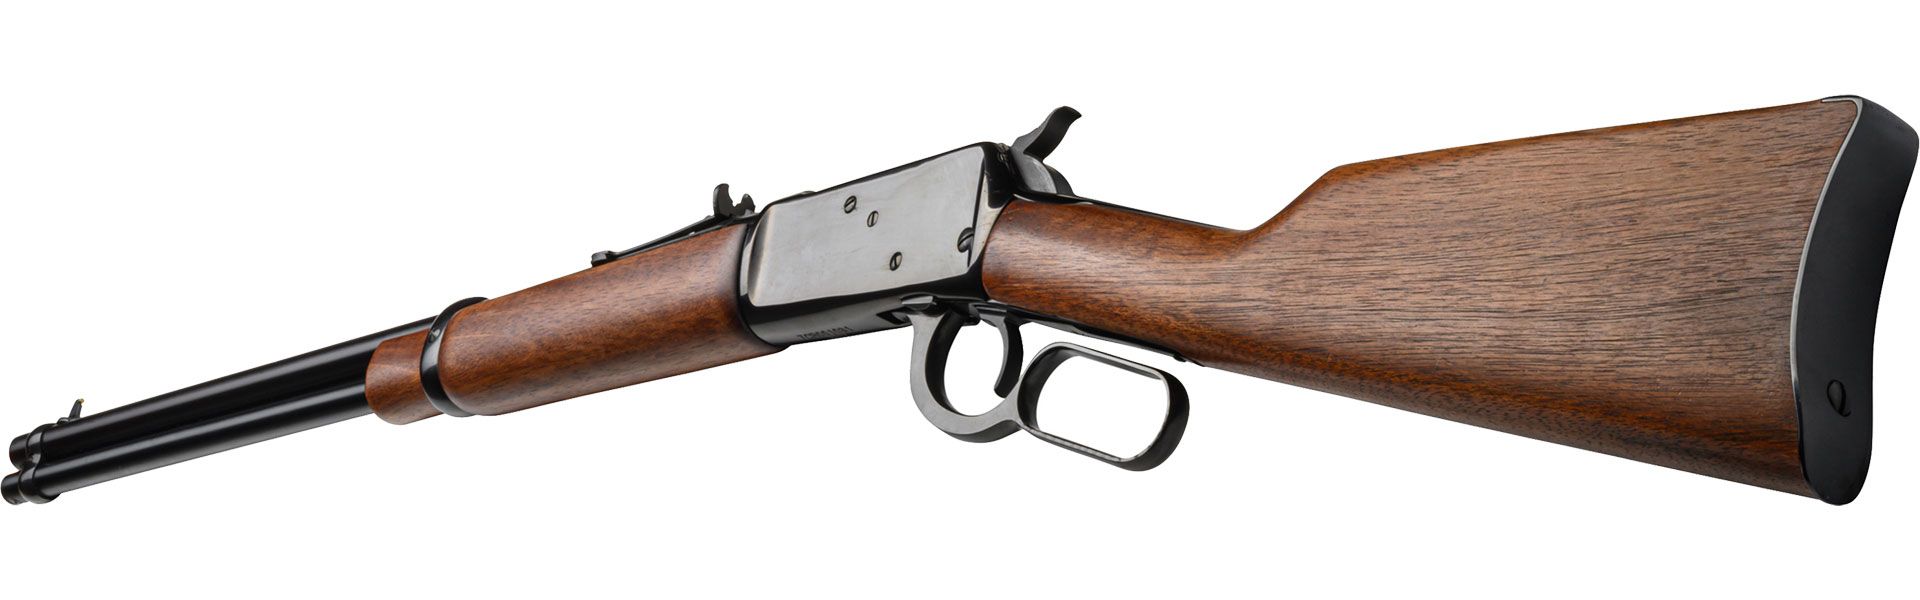 R92 Traditional hardwood stock, Black, 357 MAG / 38 SPECIAL +P, 20 In.